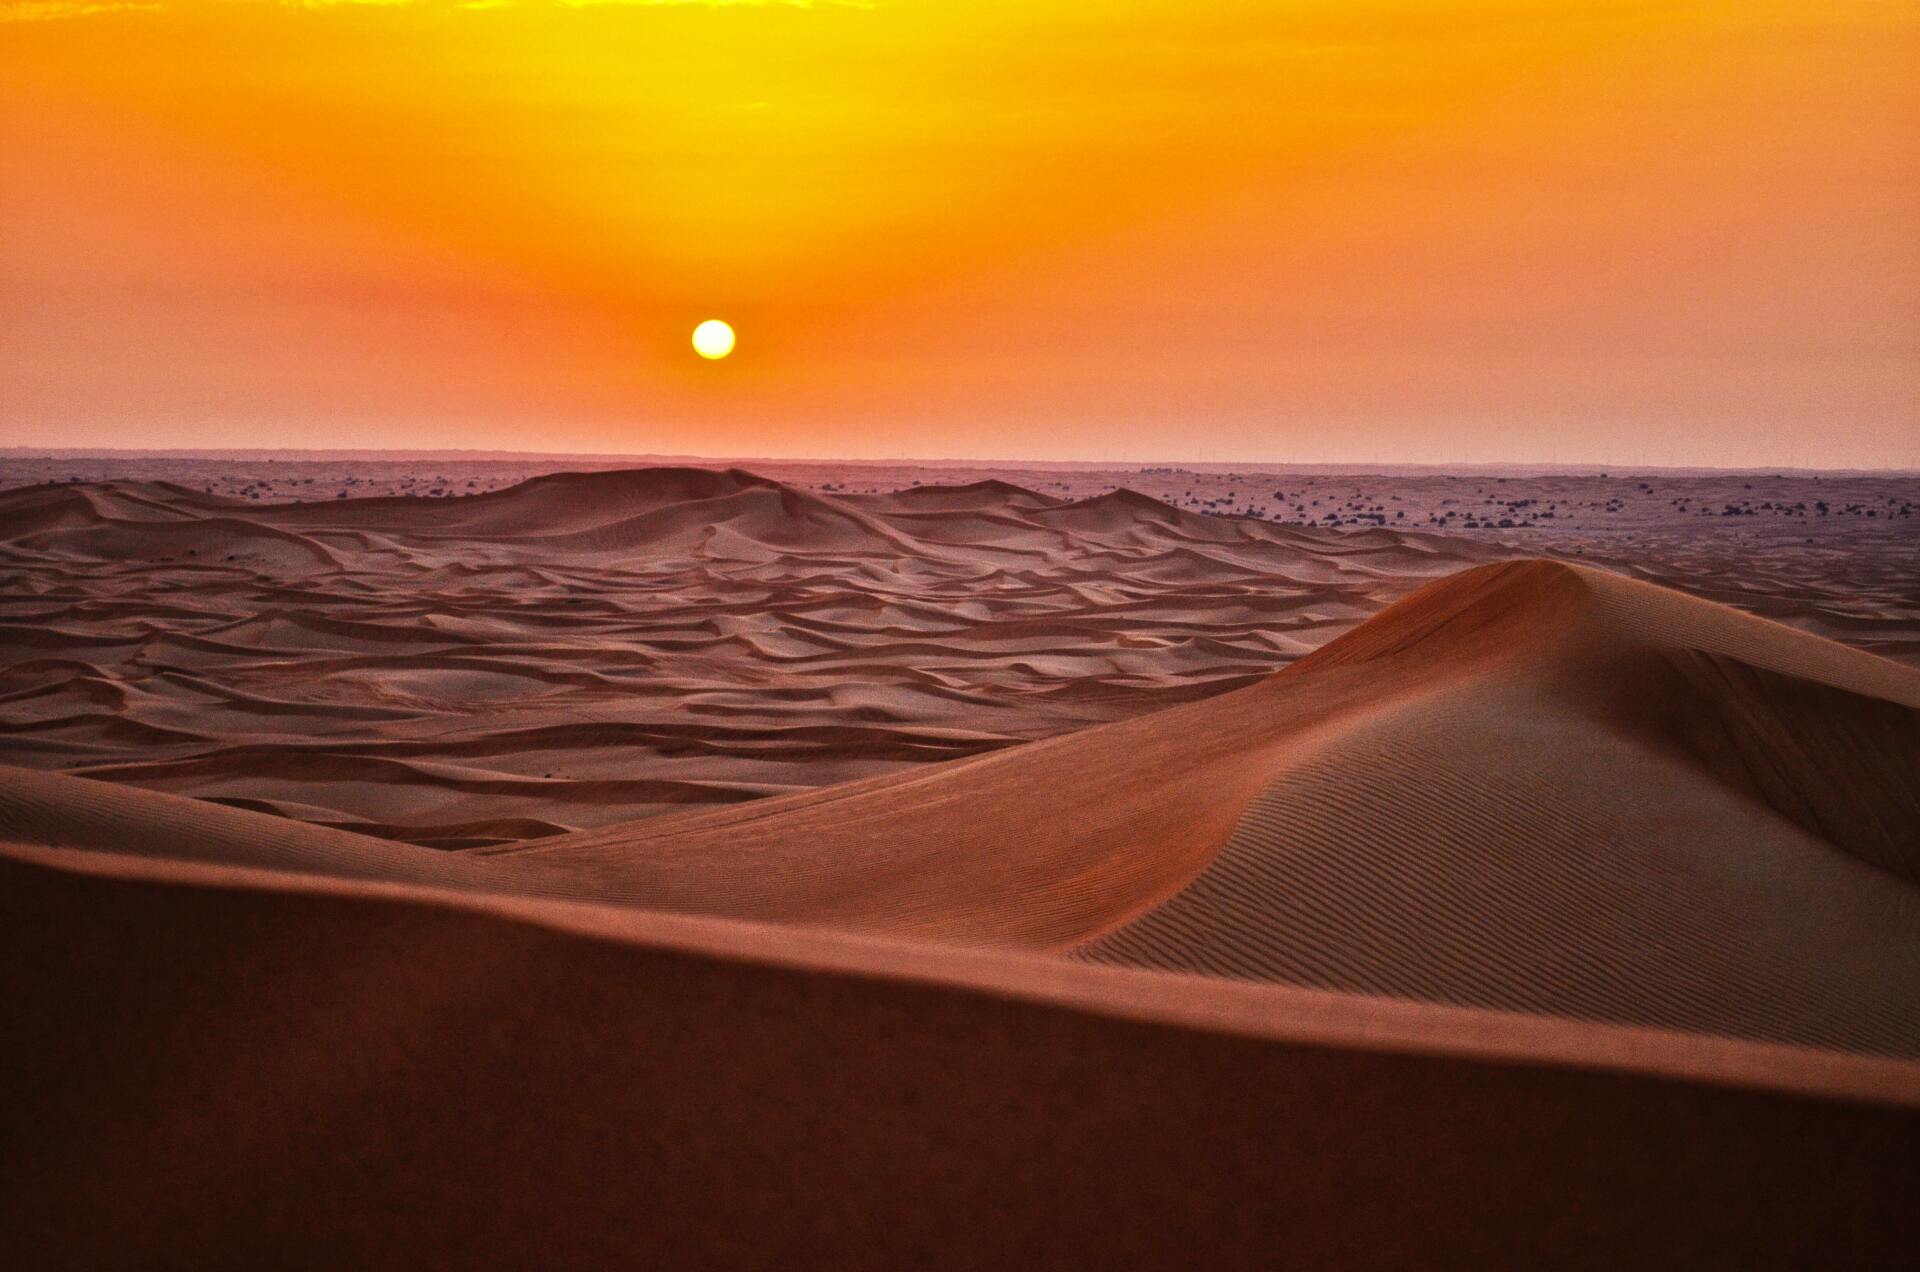 The sun is setting over a desert landscape with sand dunes in the foreground. the coaching guild,  life coach training